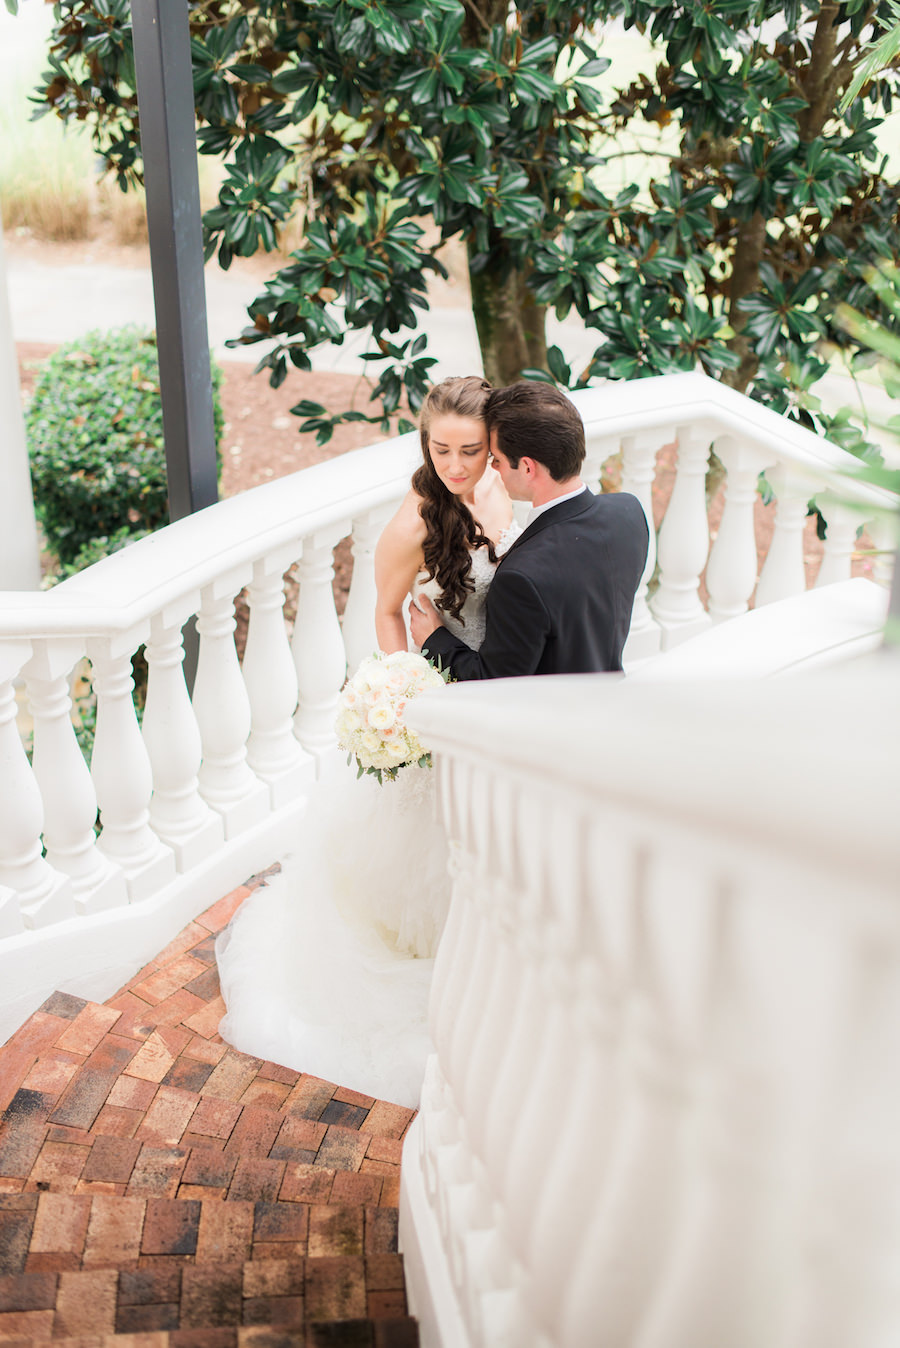 Bride and Groom Outdoor Wedding Portrait on Bricked Paved, White Staircase | Tampa Bay Brooksville Wedding Venue Southern Hills Plantation Club